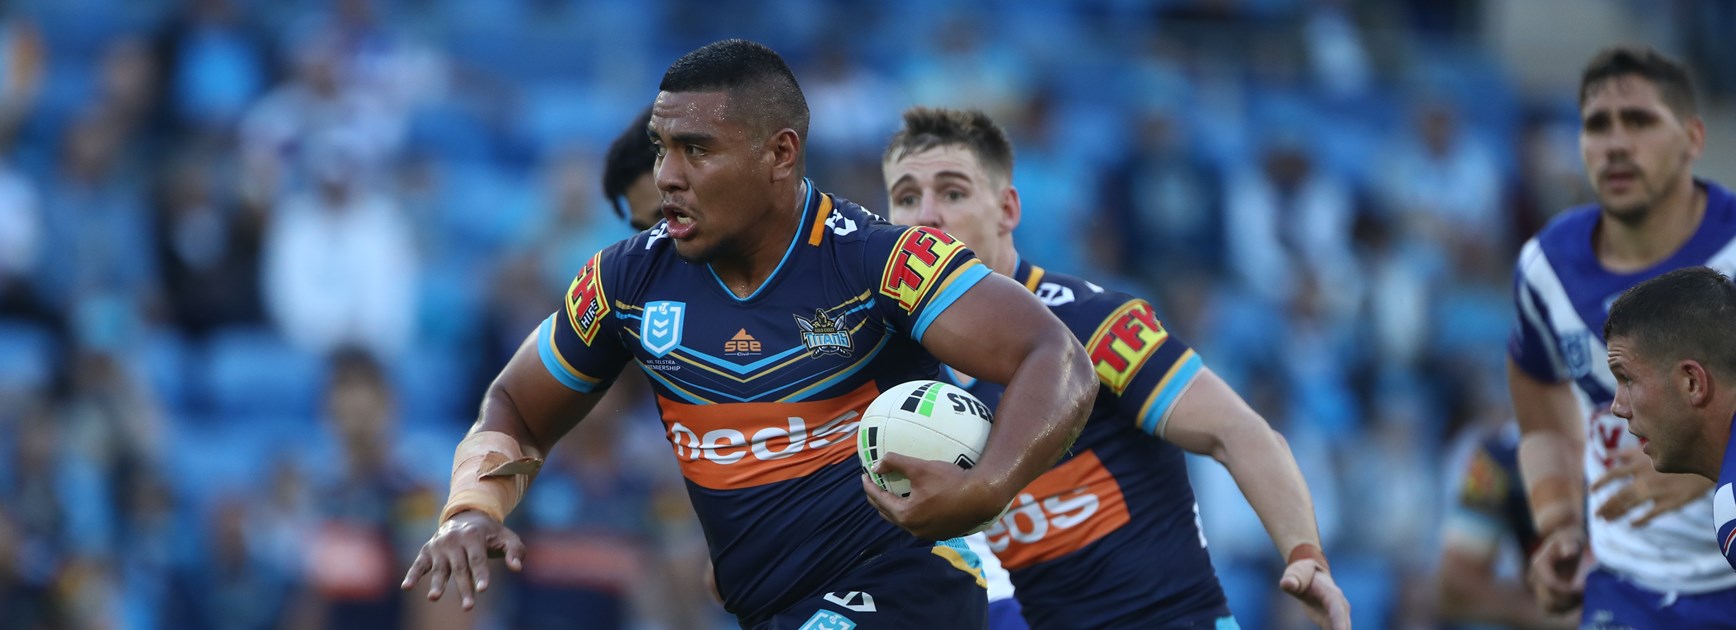 NRL signings: All the player transfers for the 2019 season